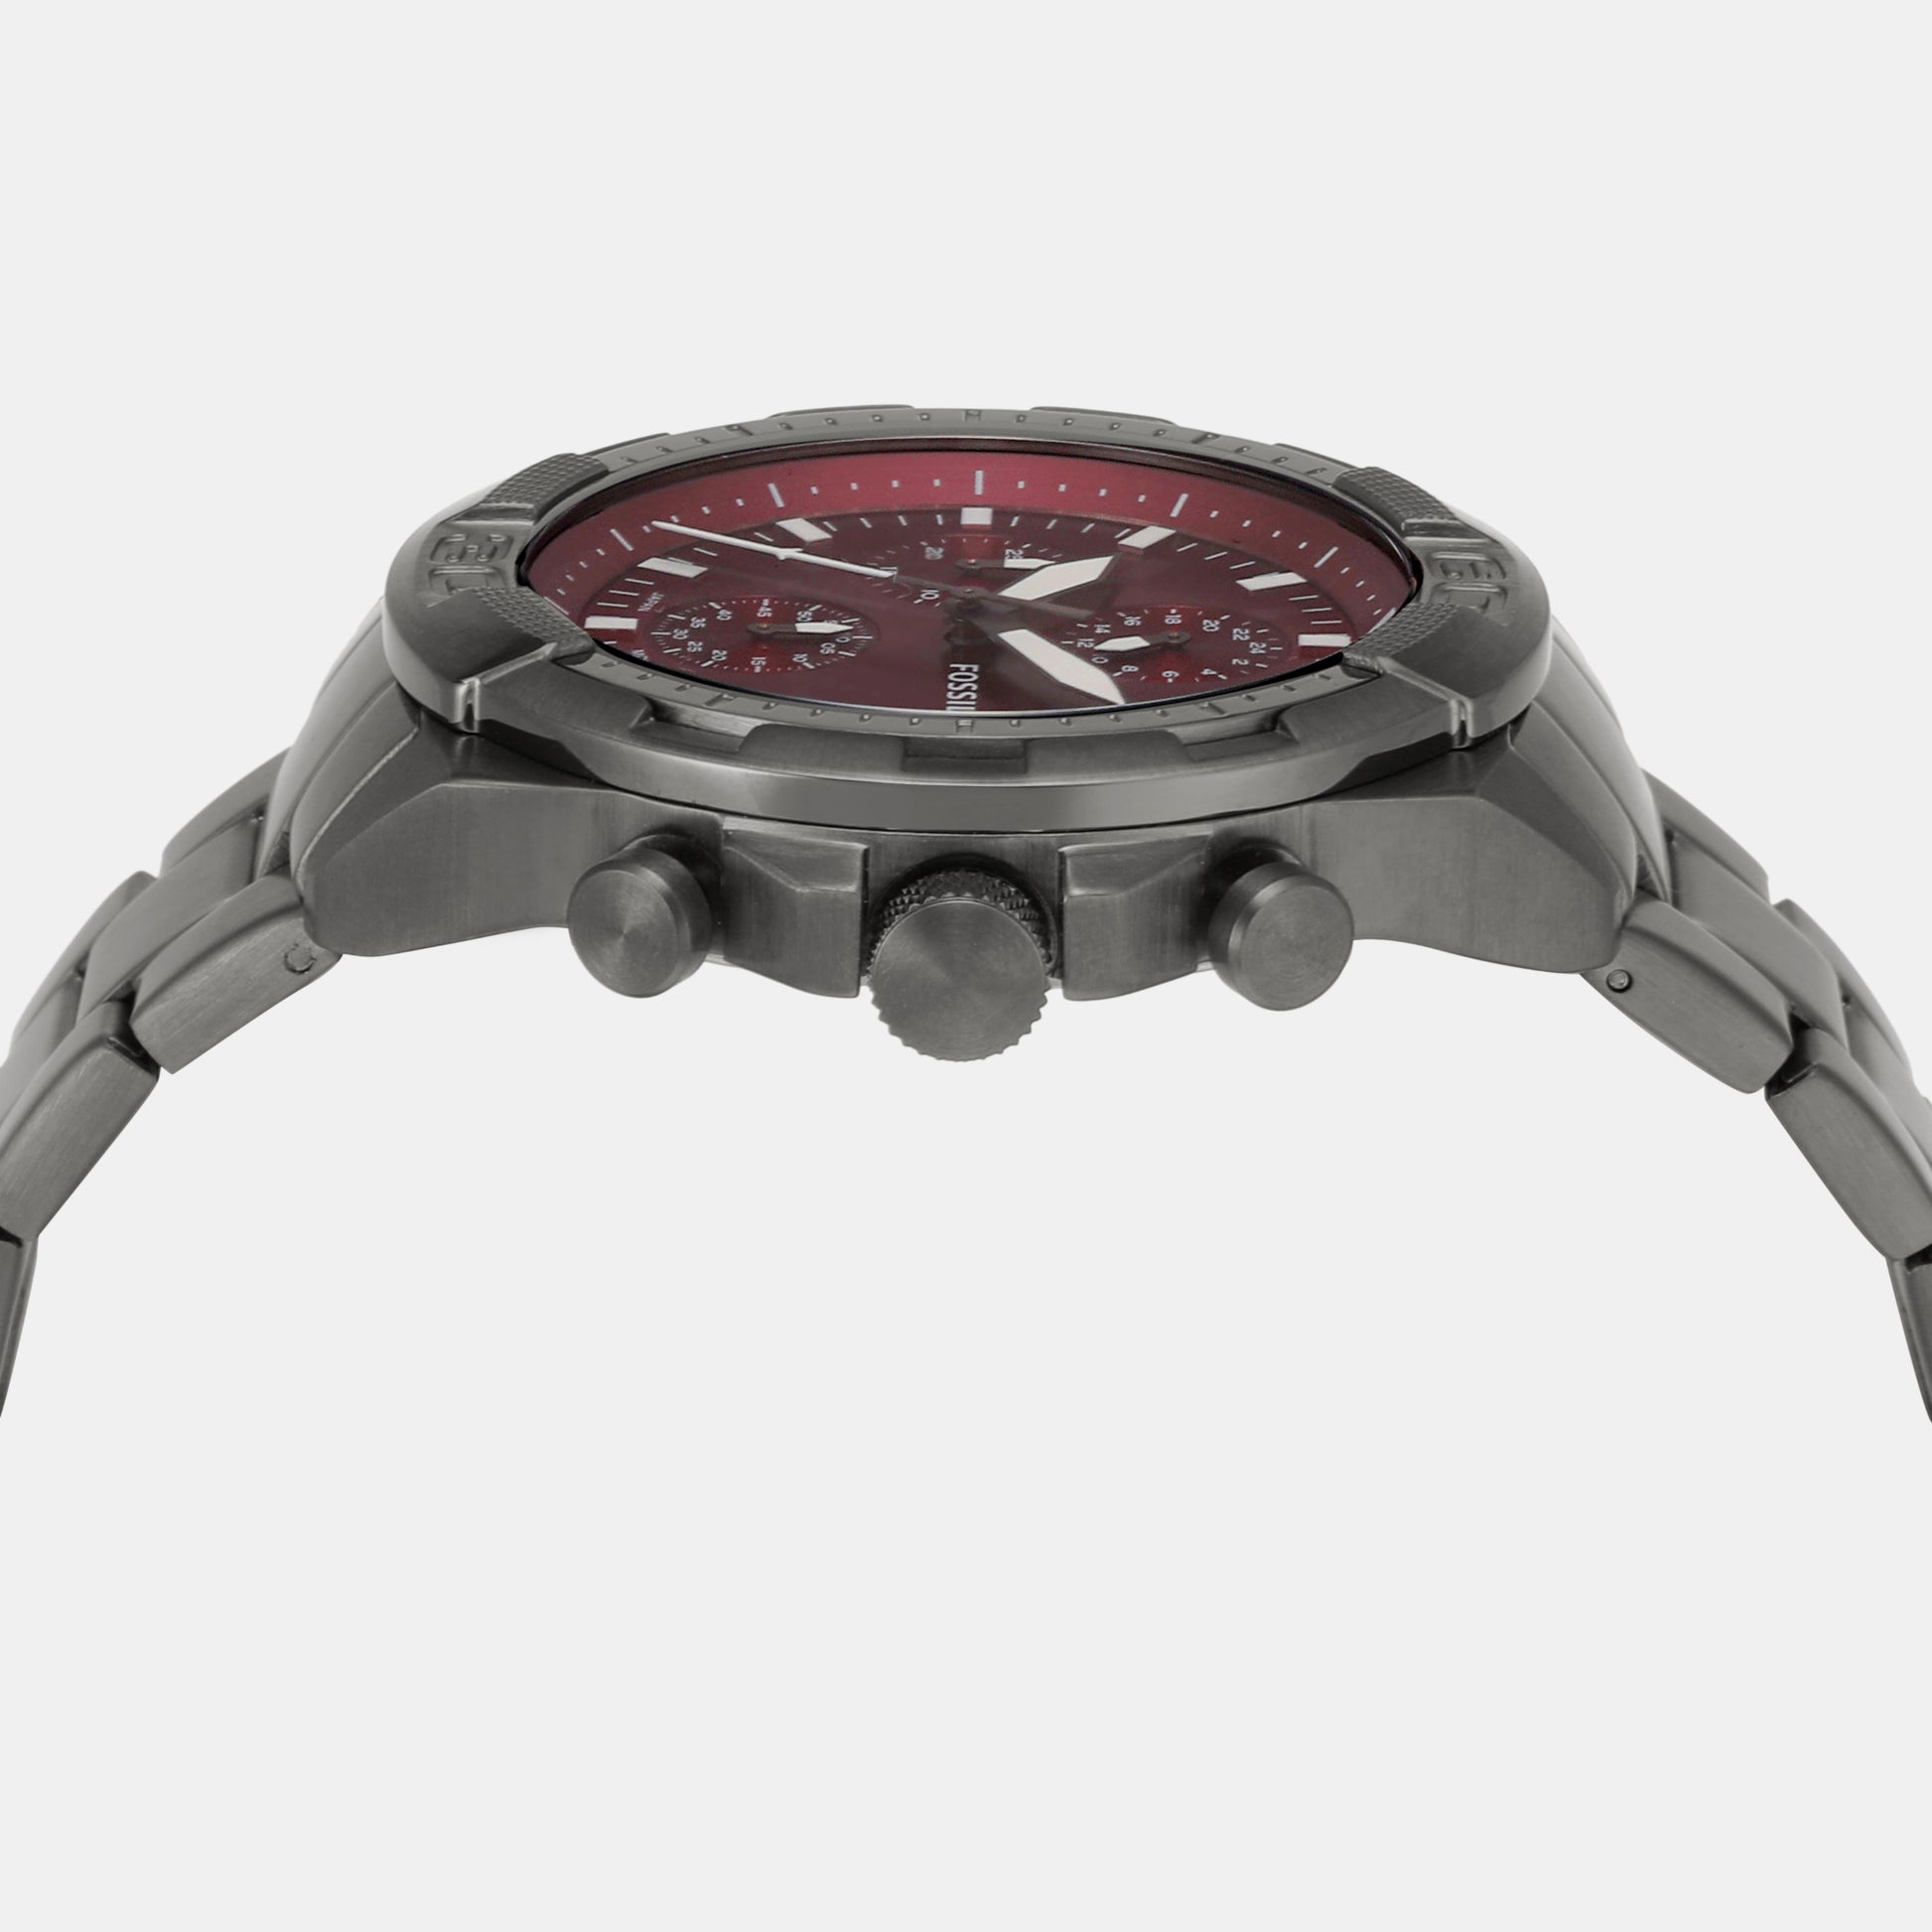 Male Bronson Chronograph Smoke In FS6017 – Stainless Just Time Watch Steel